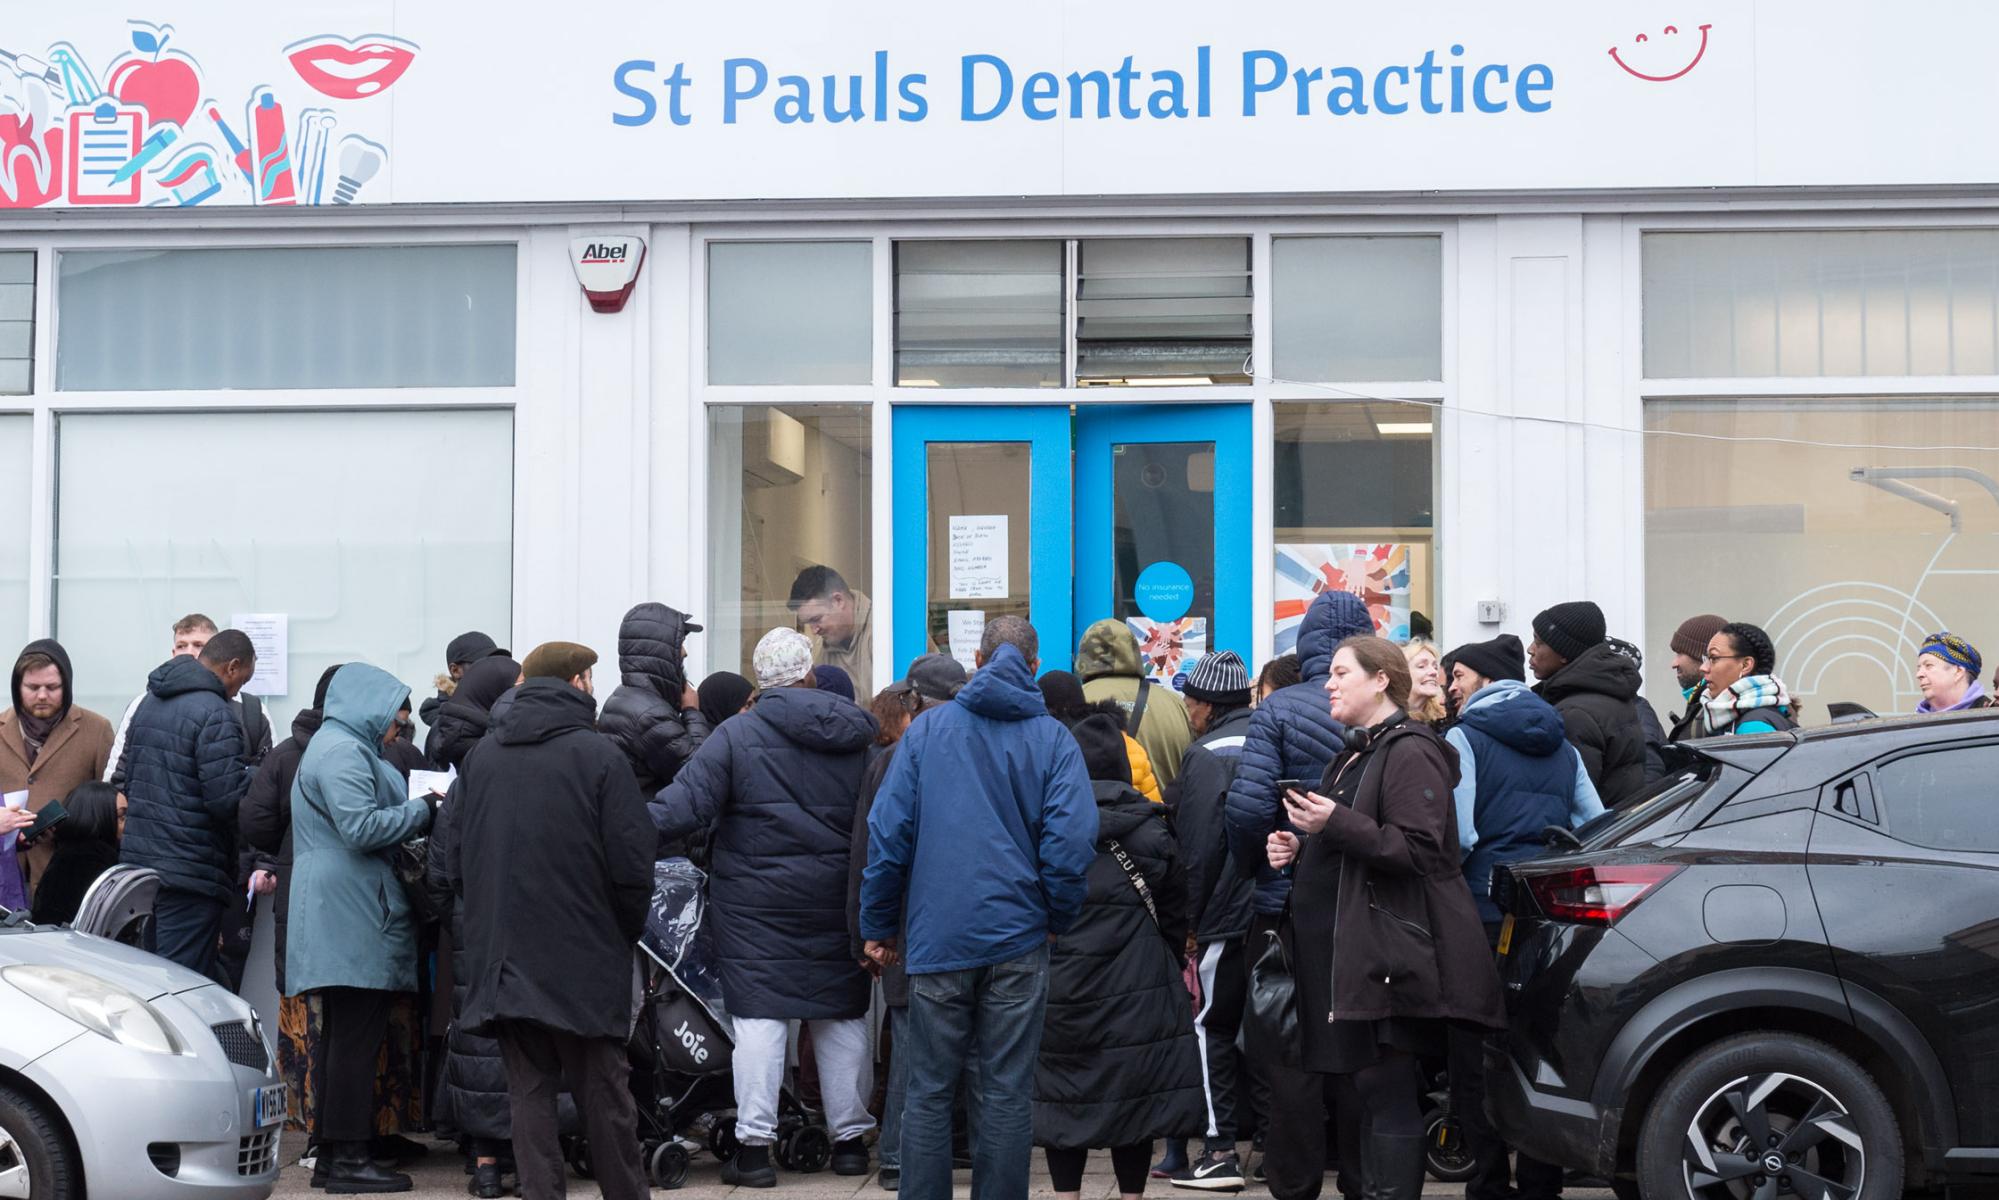 dentists barred english nhs patients over skipped checkups in pandemic